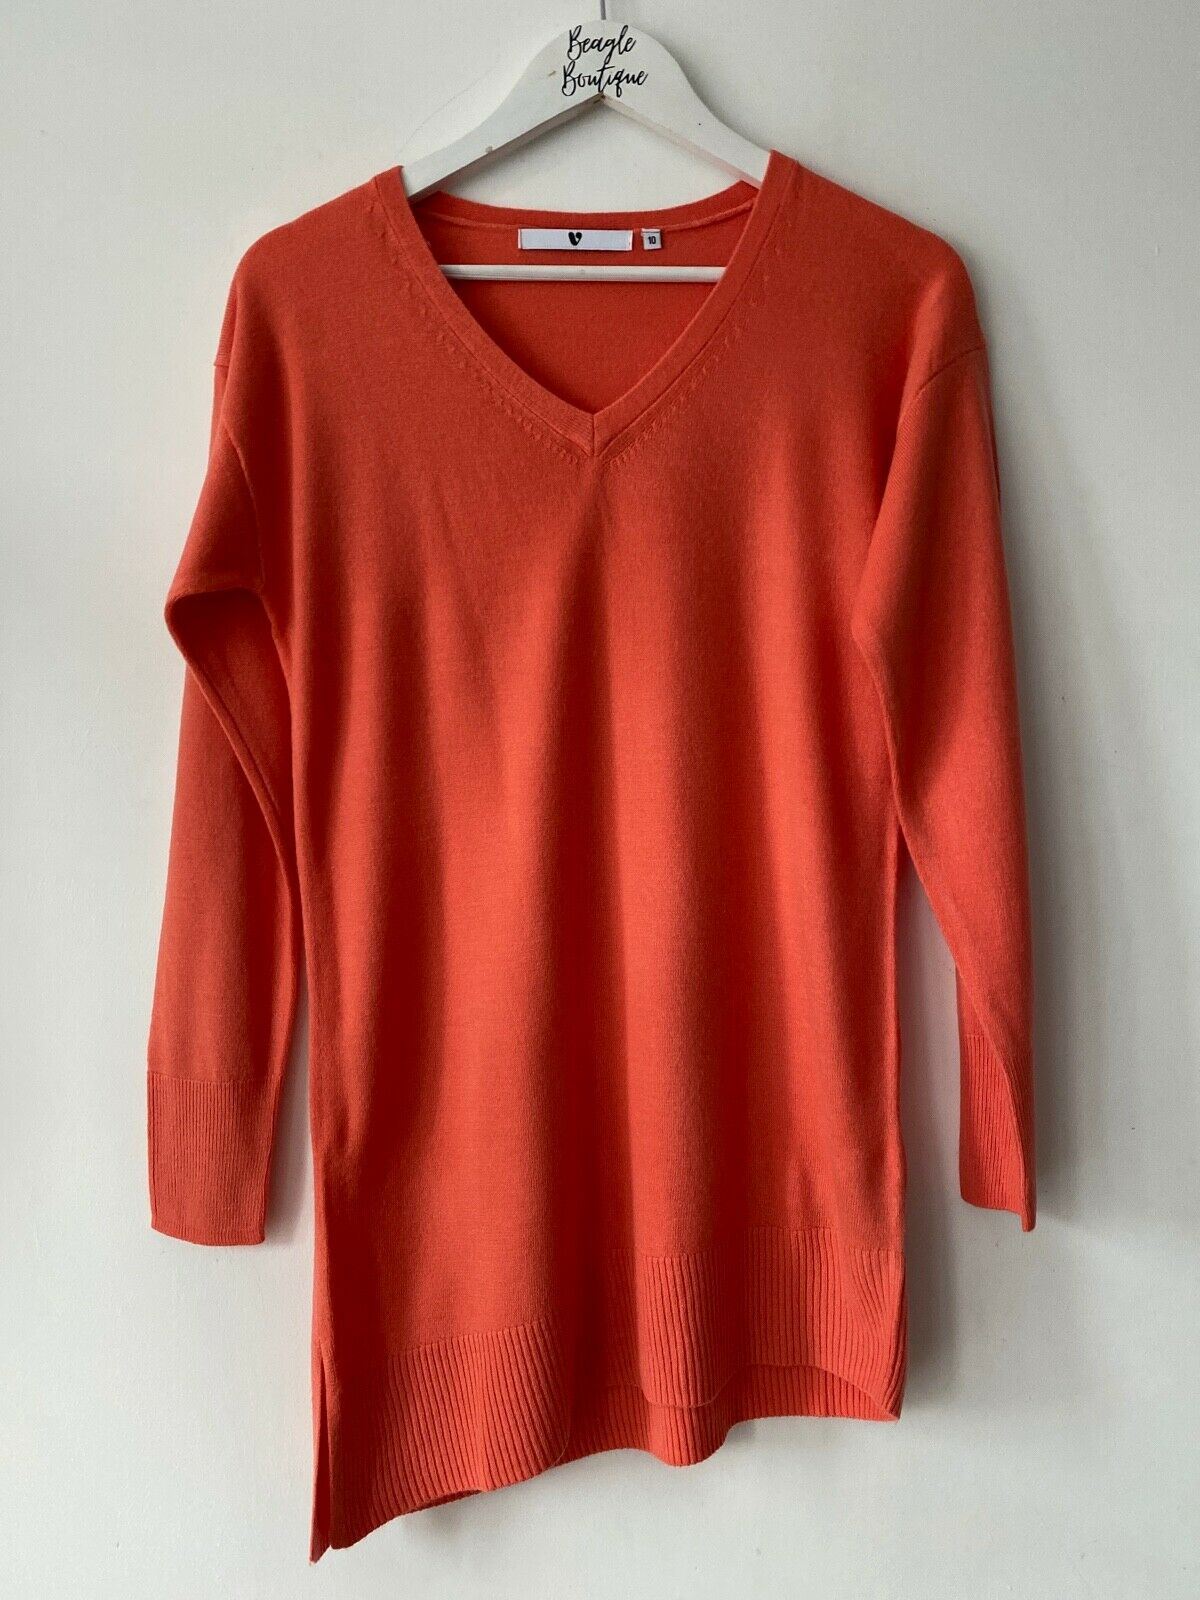 Very Asymmetric Knit Jumper Size 10 Coral